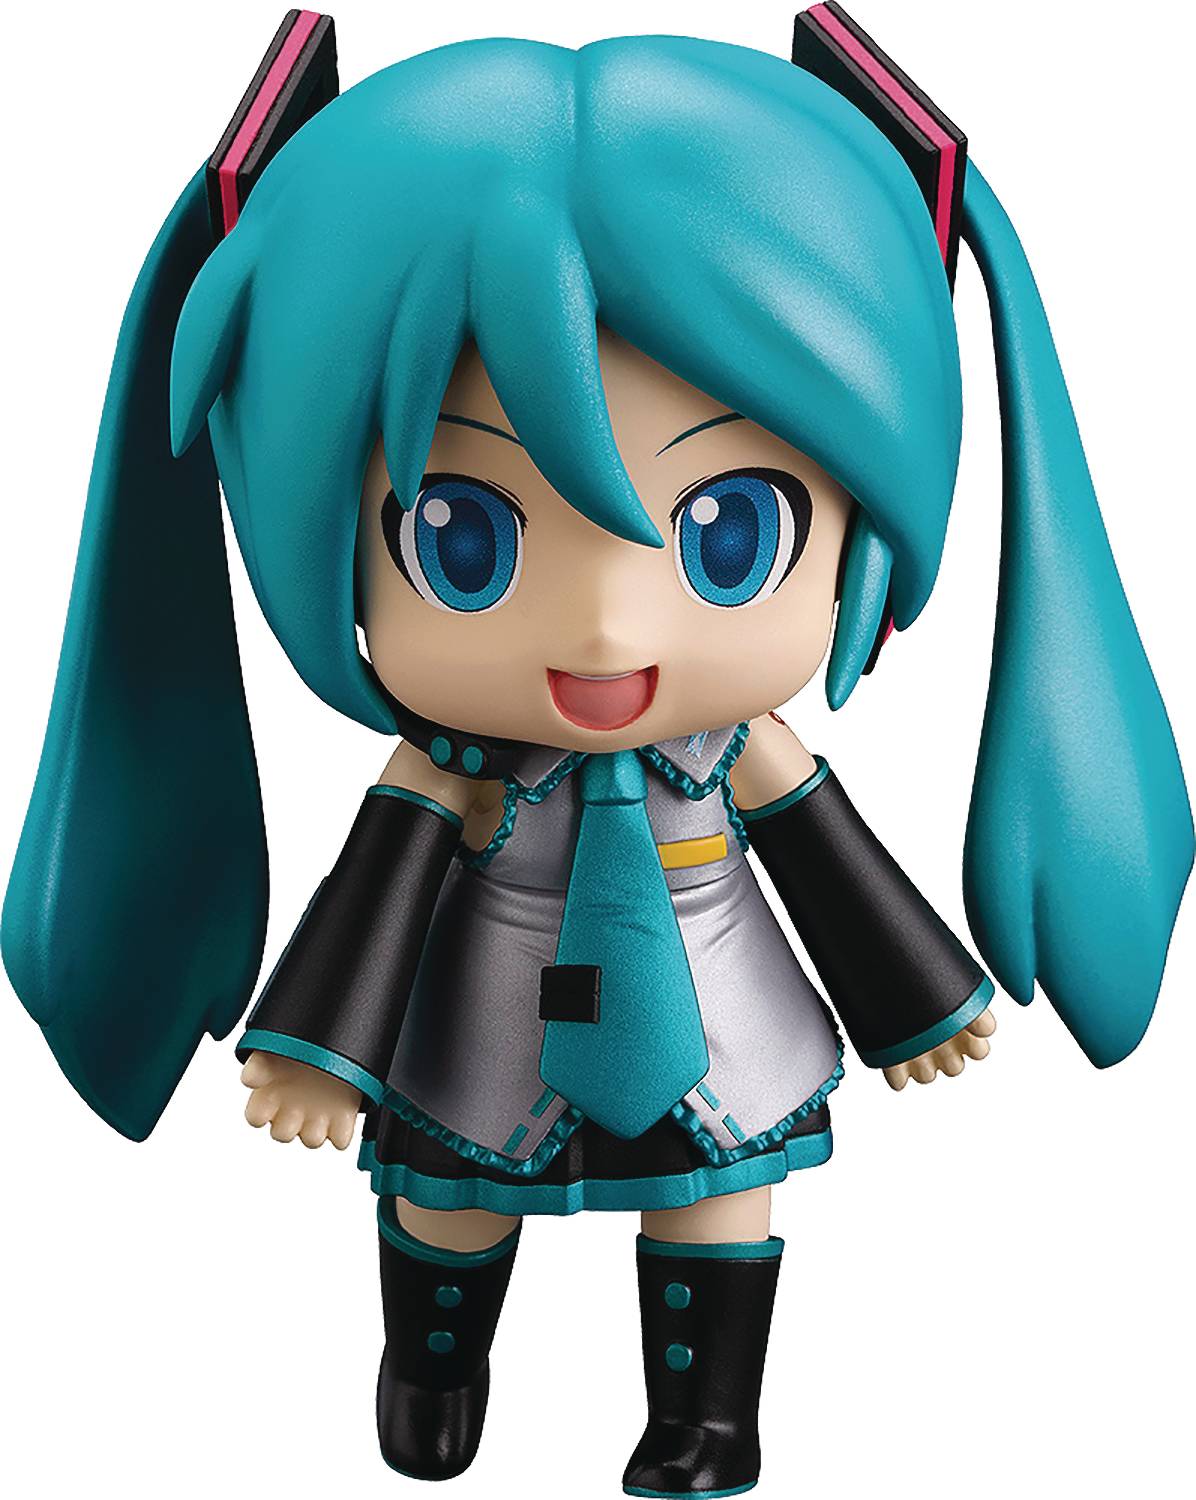 CHARACTER VOCAL SERIES 01 MIKUDAYO 10TH ANN NENDOROID AF